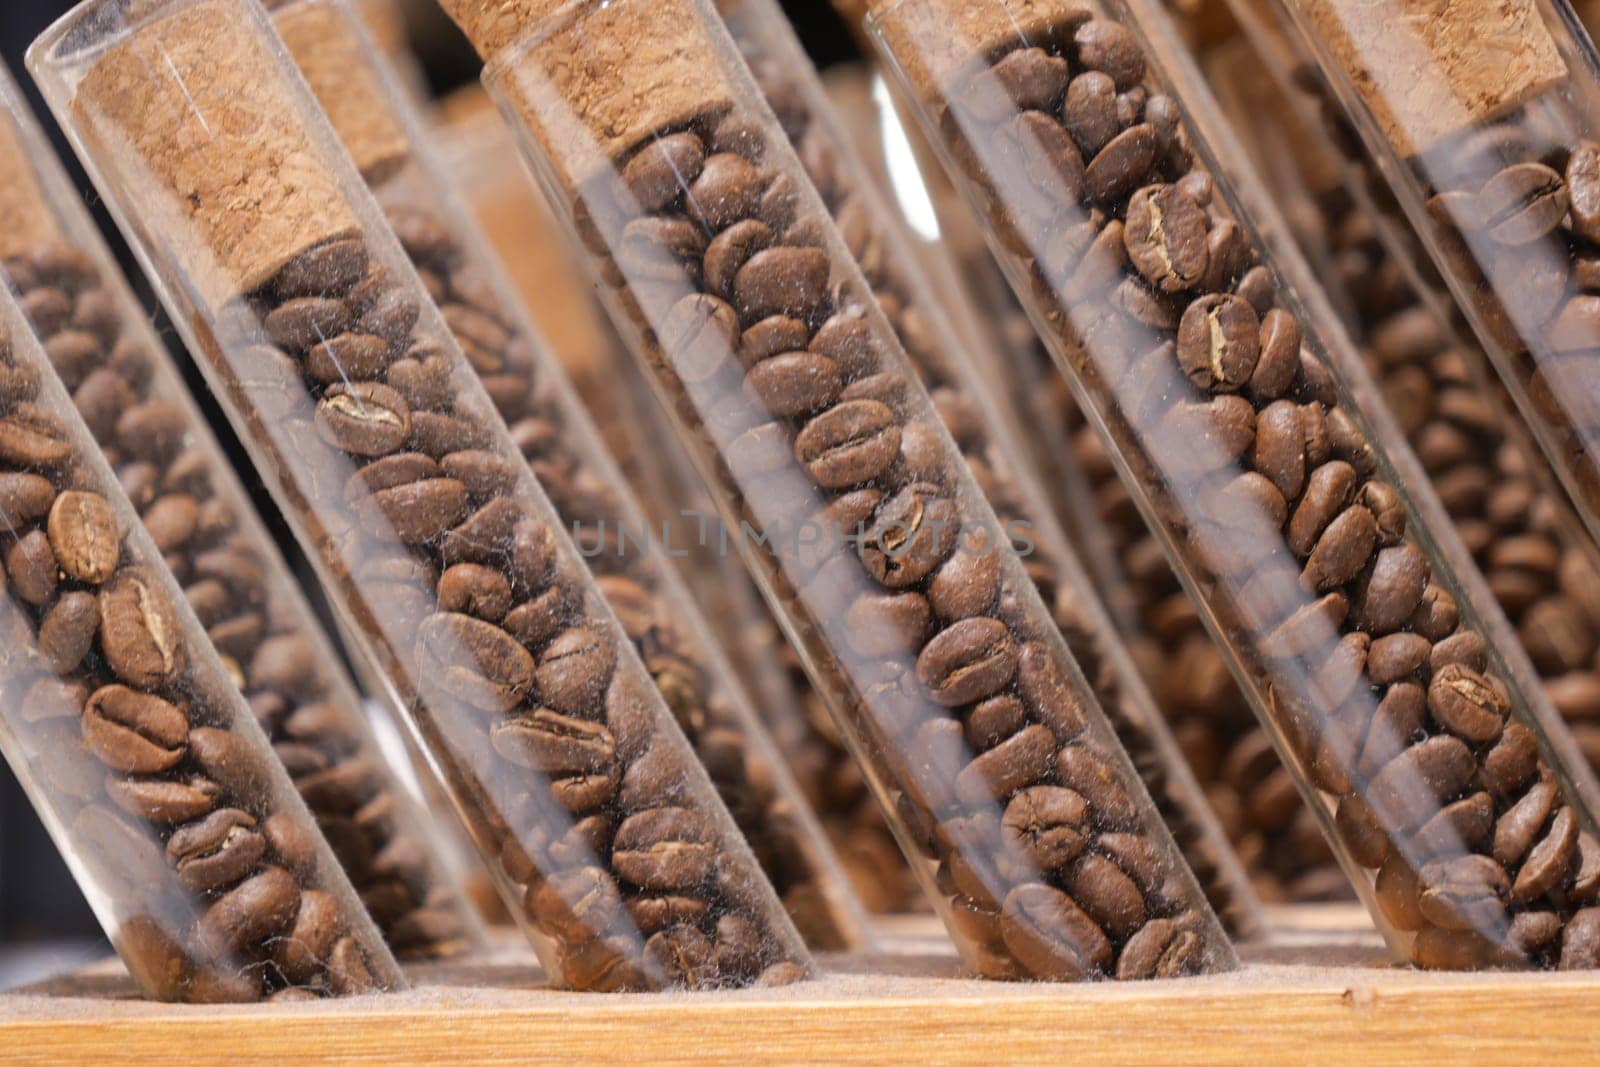 Test tubes filled with coffee beans on wooden shelf by towfiq007